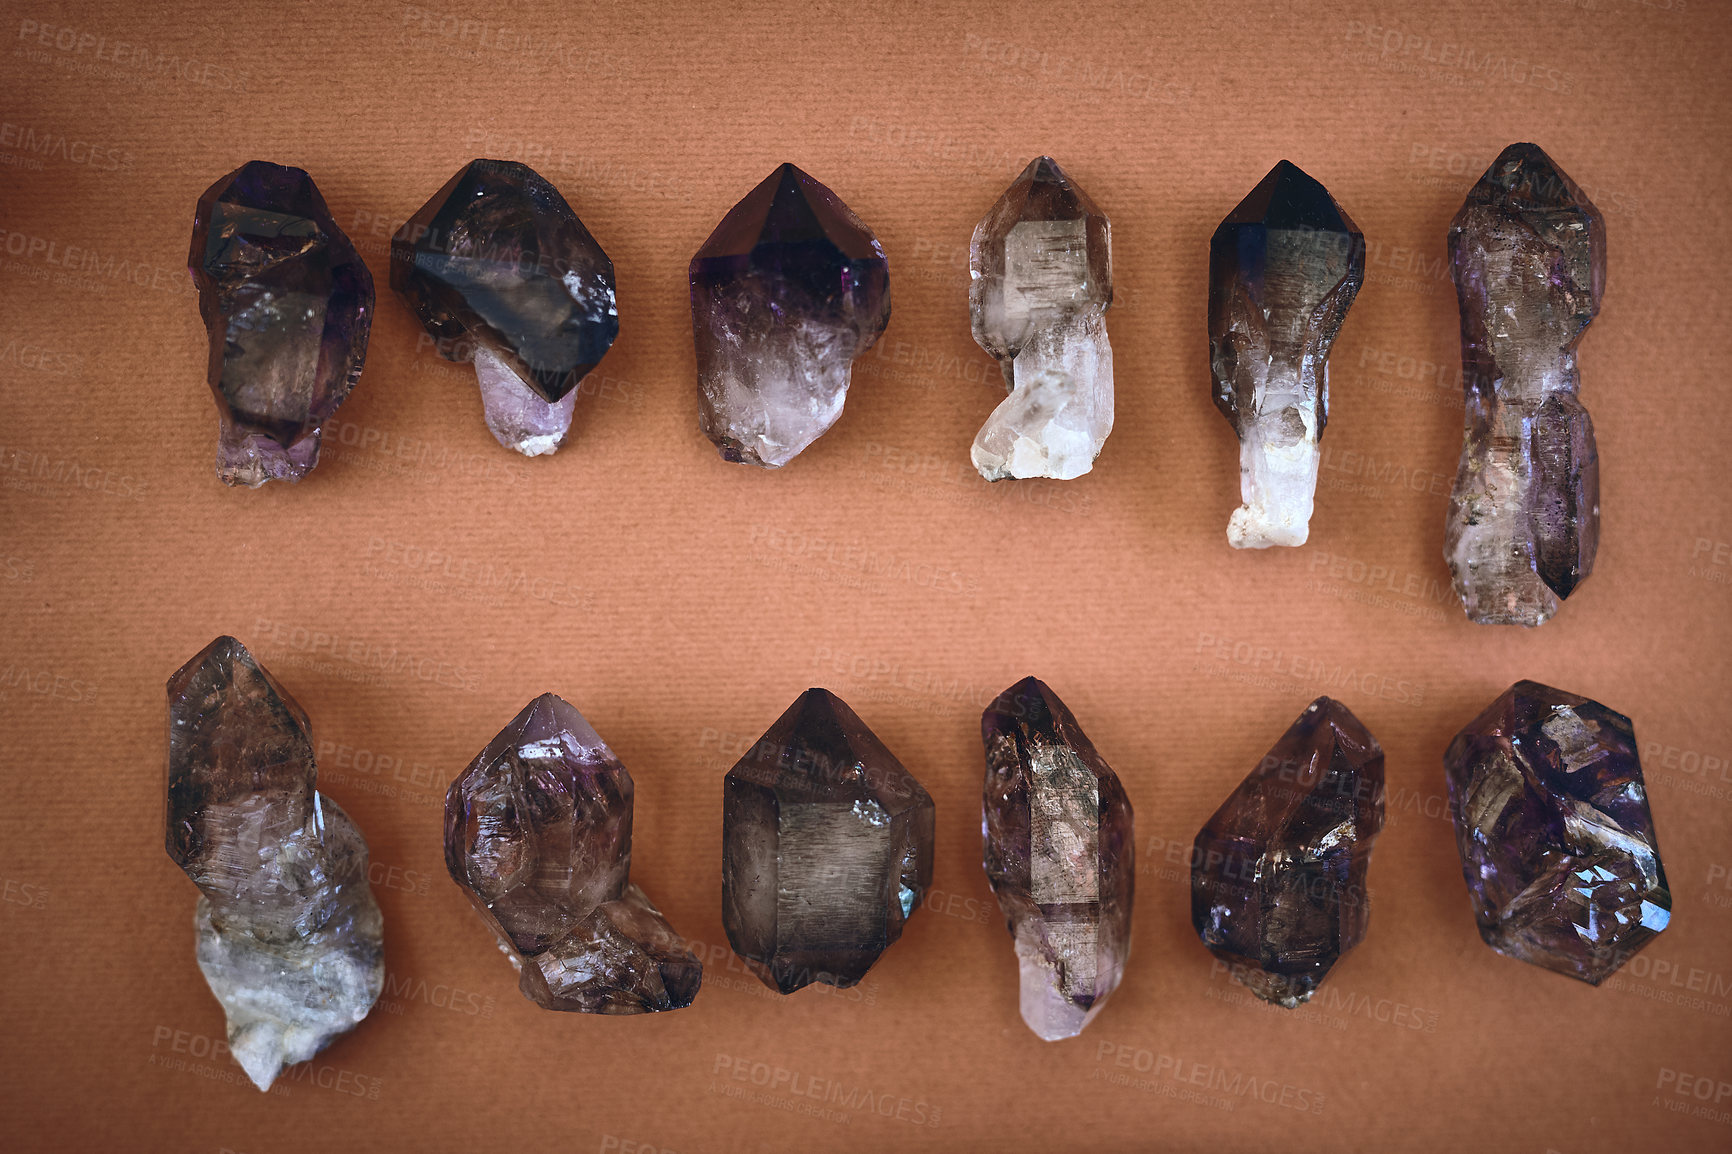 Buy stock photo High angle shot of a table filled with different types of crystals inside during the day